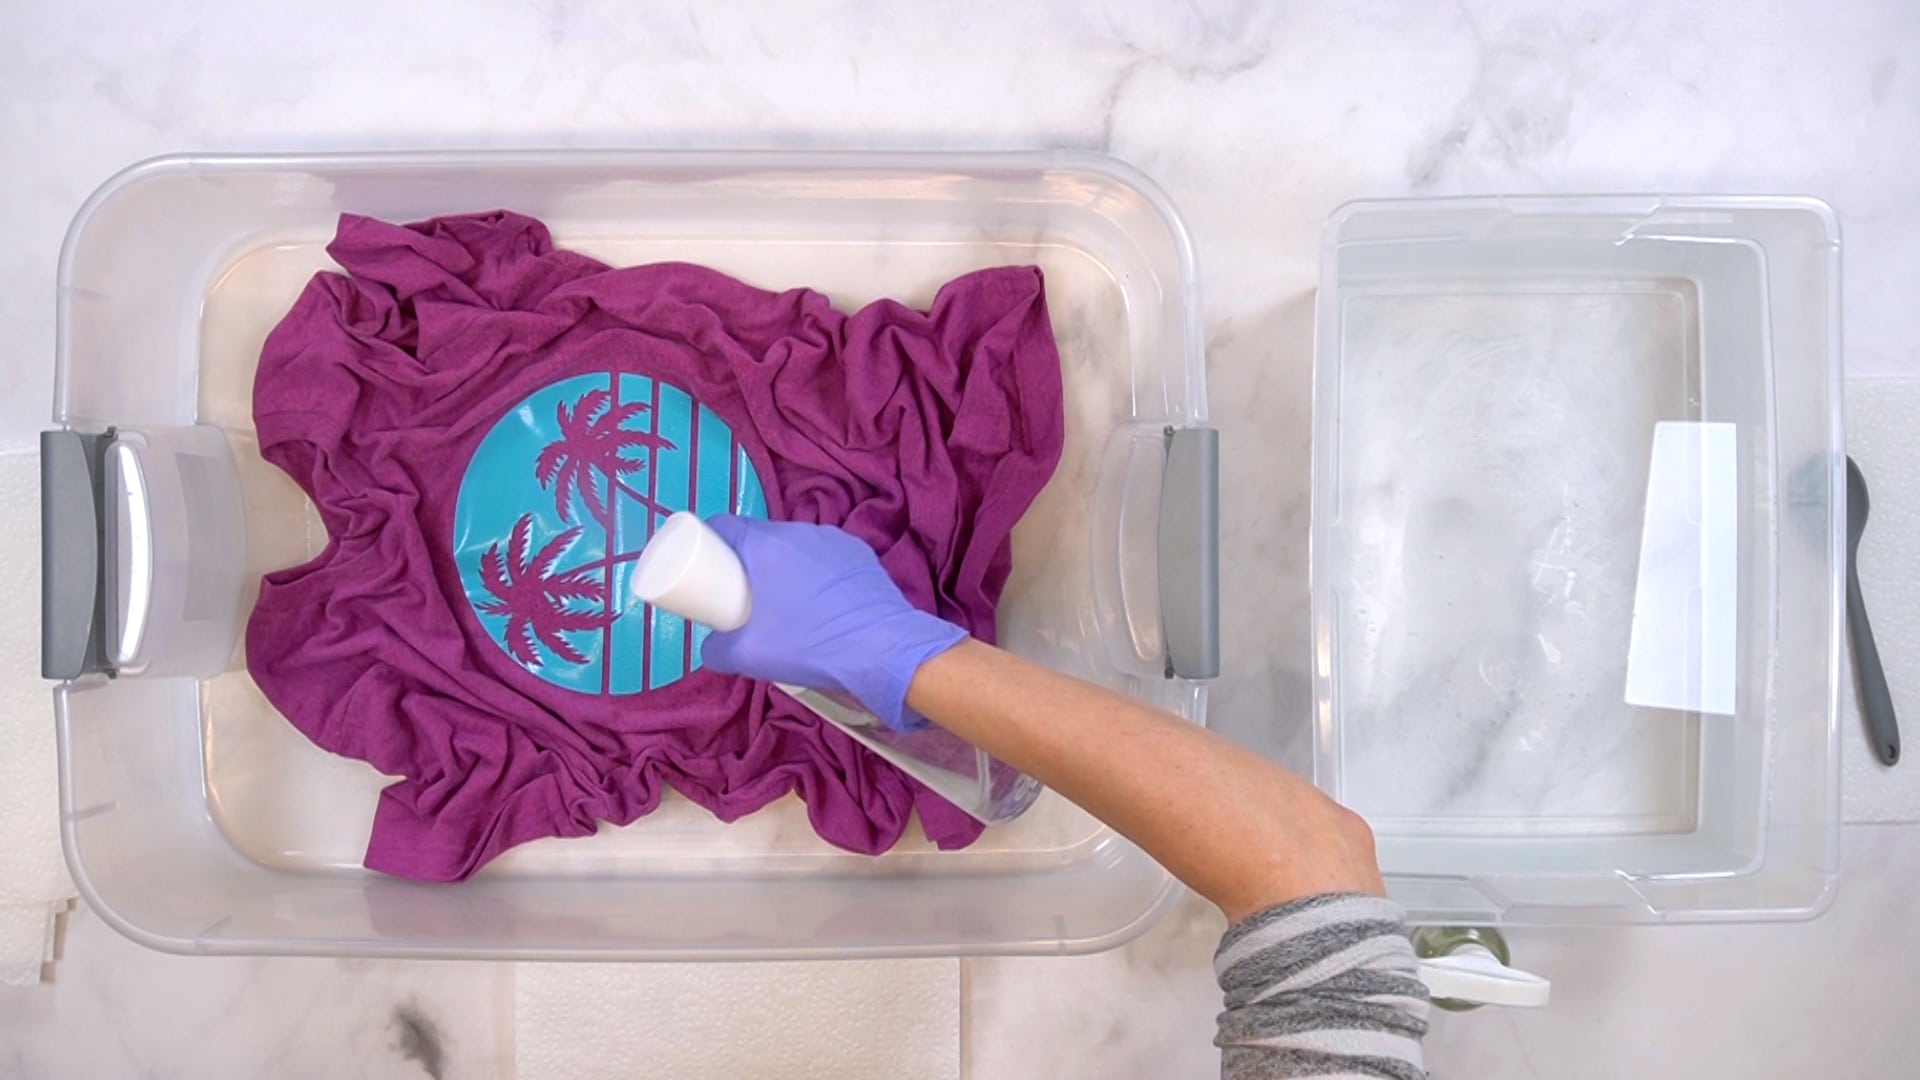 Hands wearing purple gloves spraying bleach solution on a purple shirt in a plastic tub